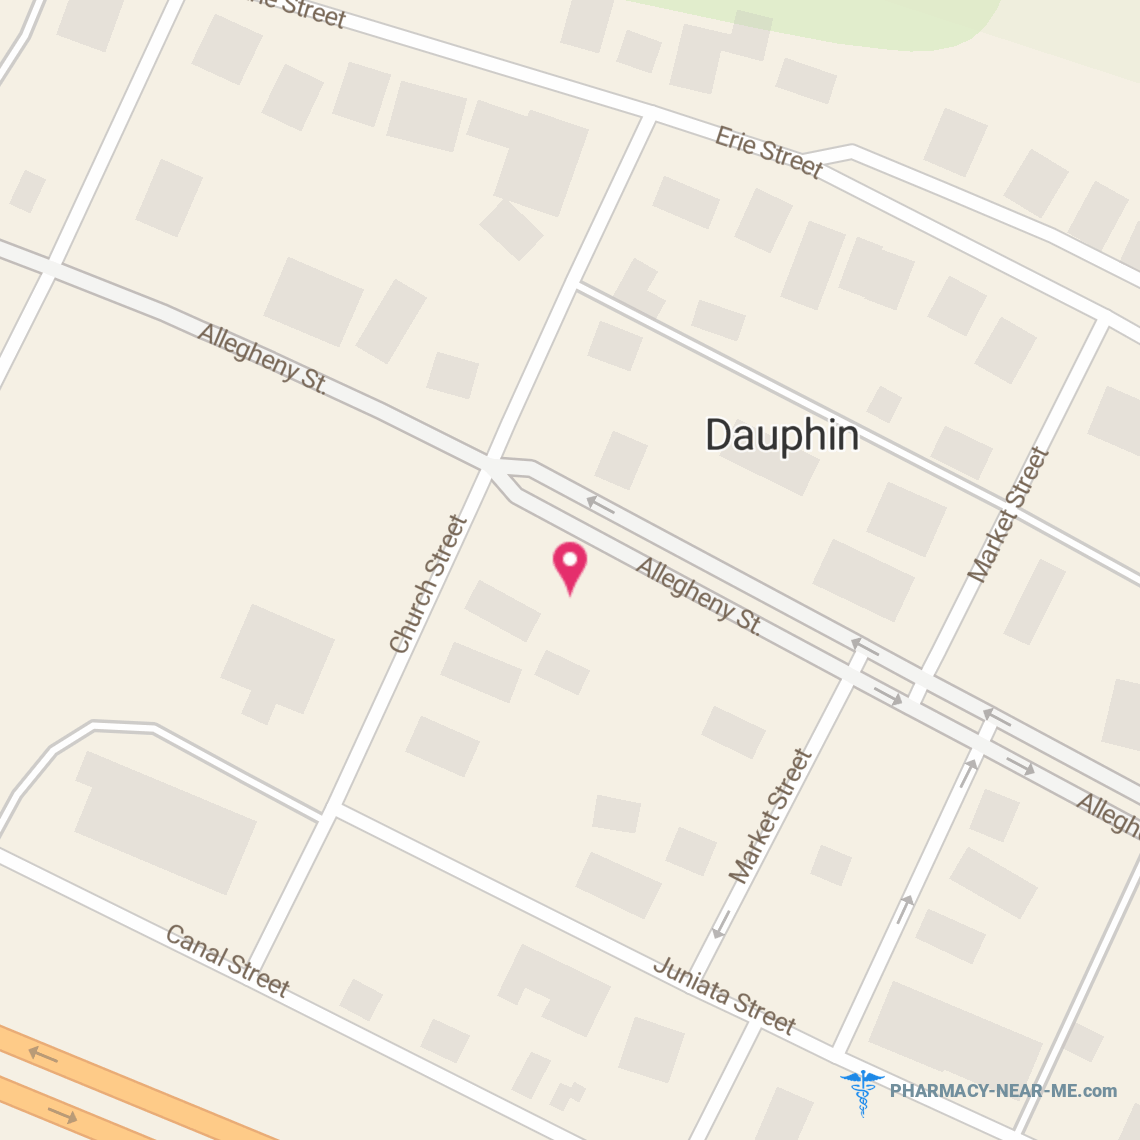 DAUPHIN PROFESSIONAL PHARMACY - Pharmacy Hours, Phone, Reviews & Information: 722 Allegheny Street, Dauphin, Pennsylvania 17018, United States